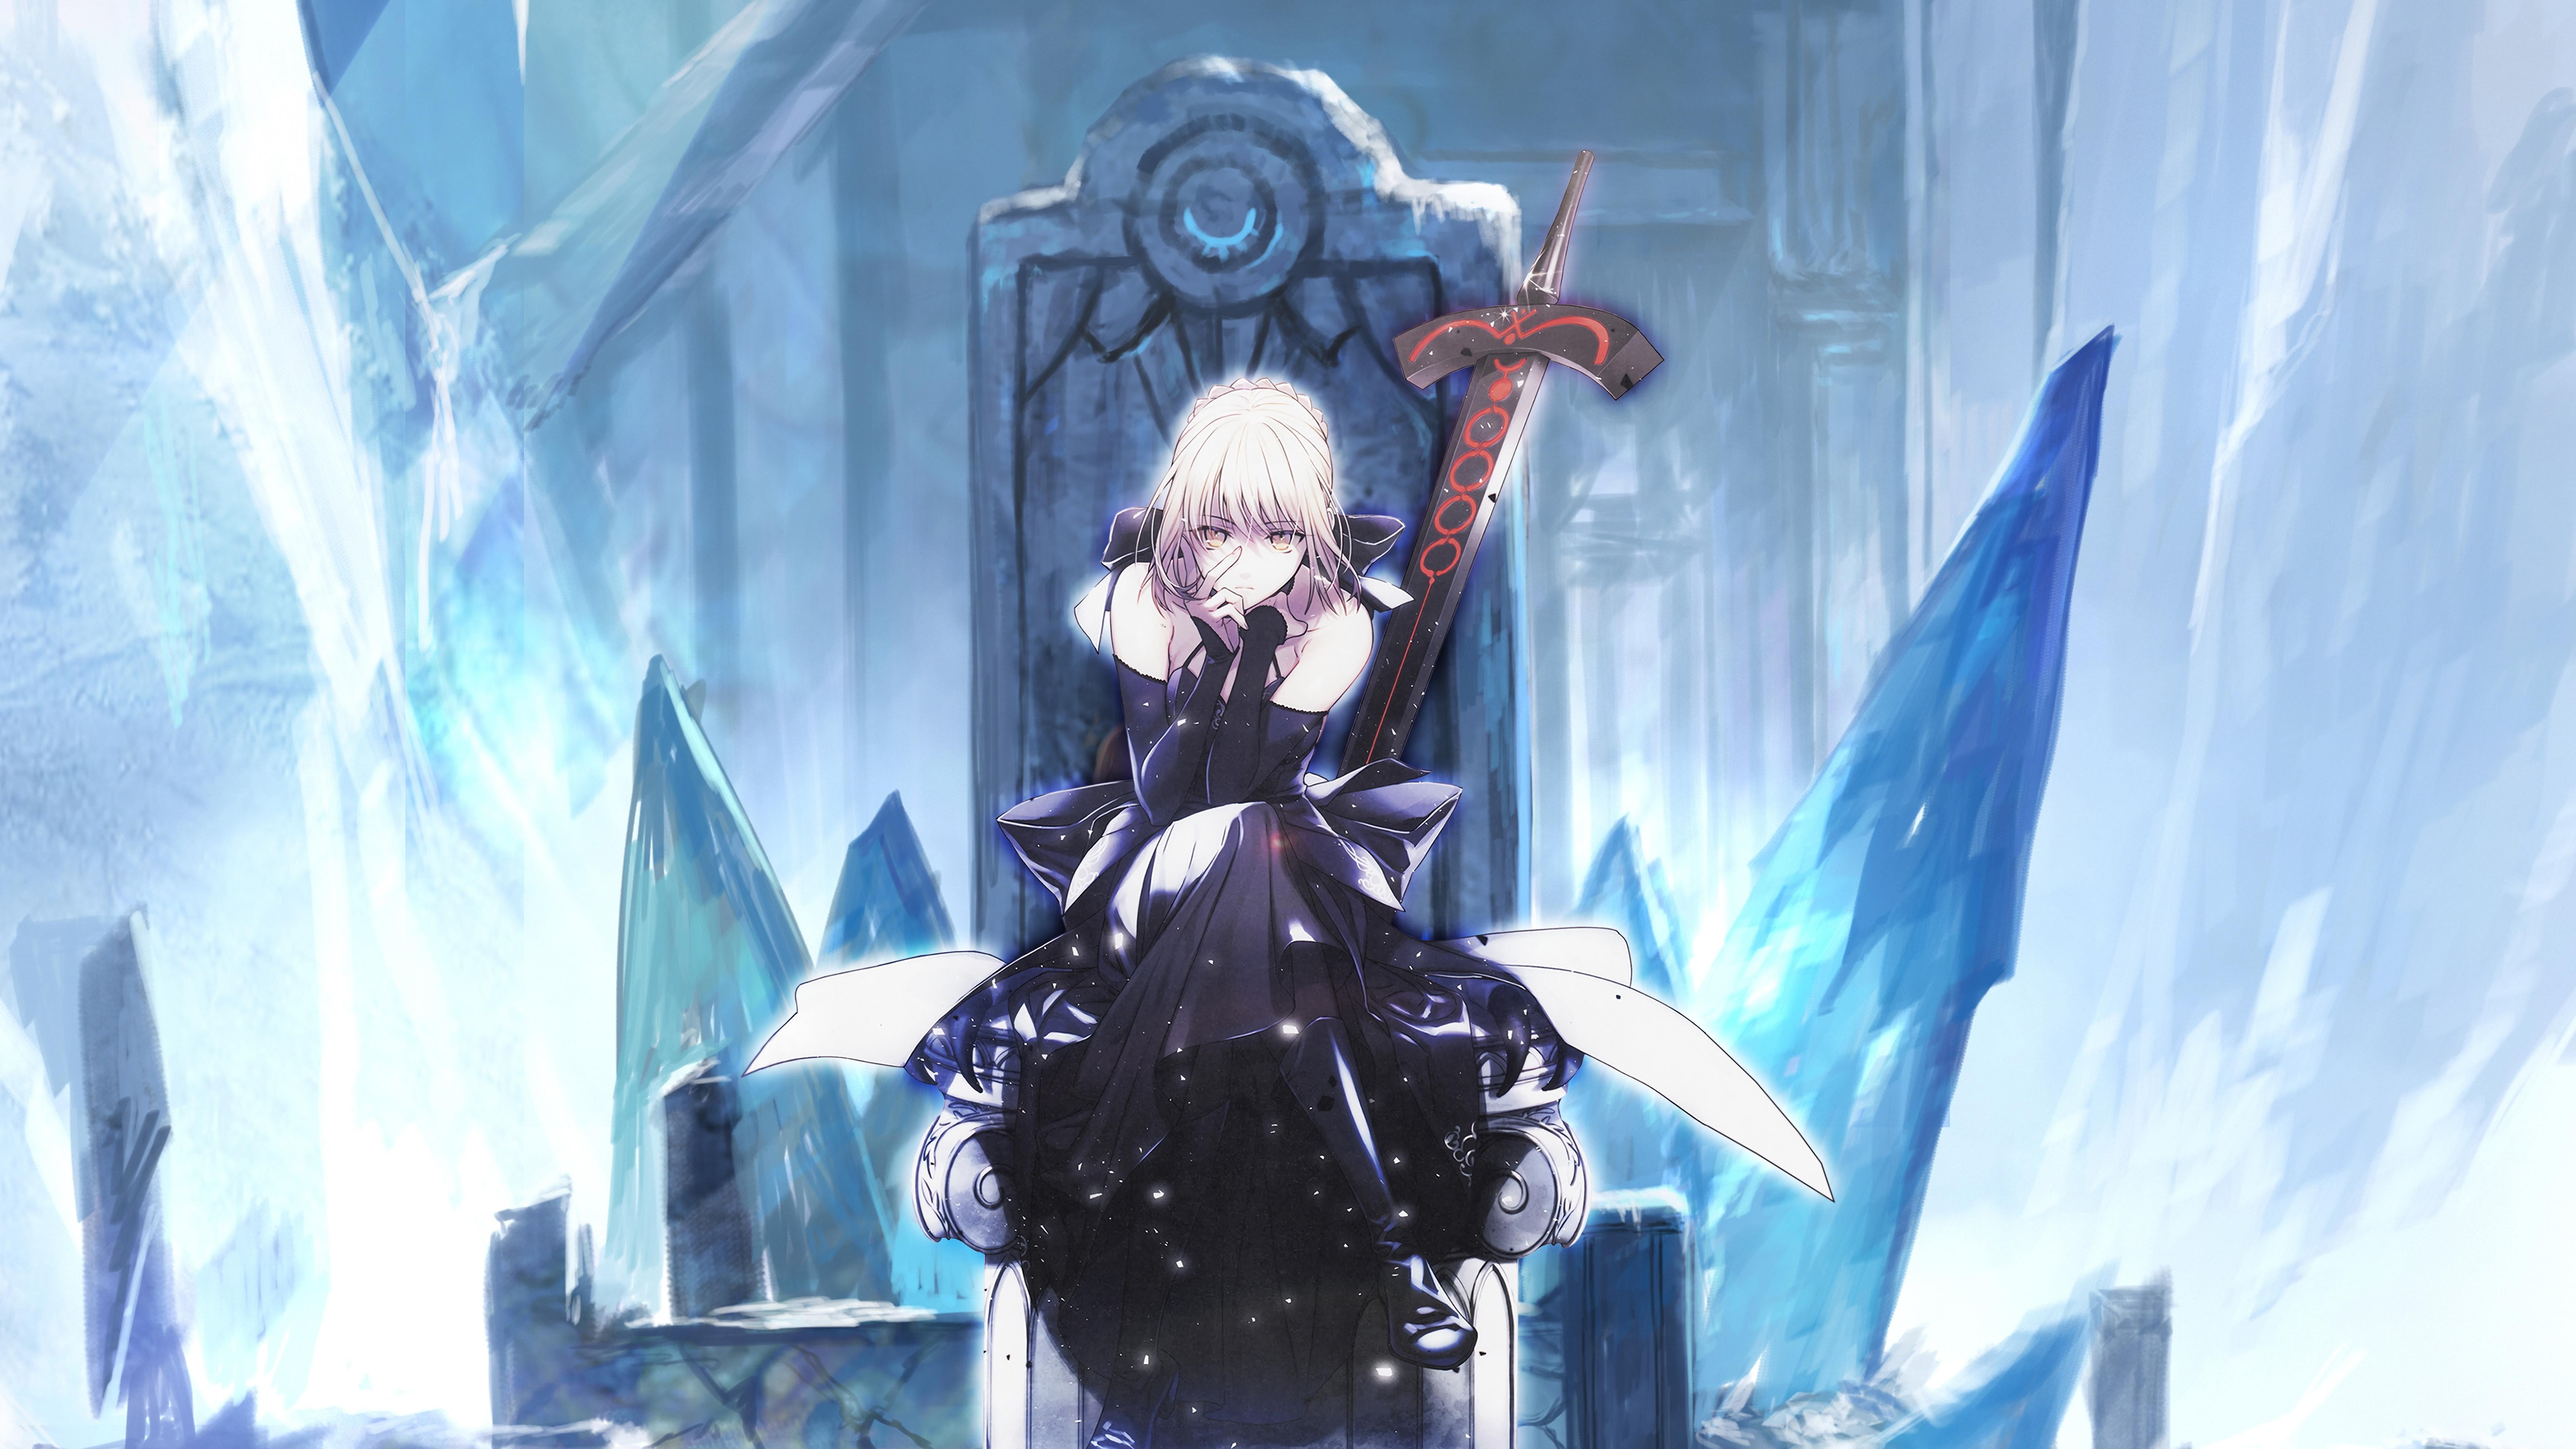 Saber Alter wallpaper, anime, anime girls, Fate/Stay Night, throne